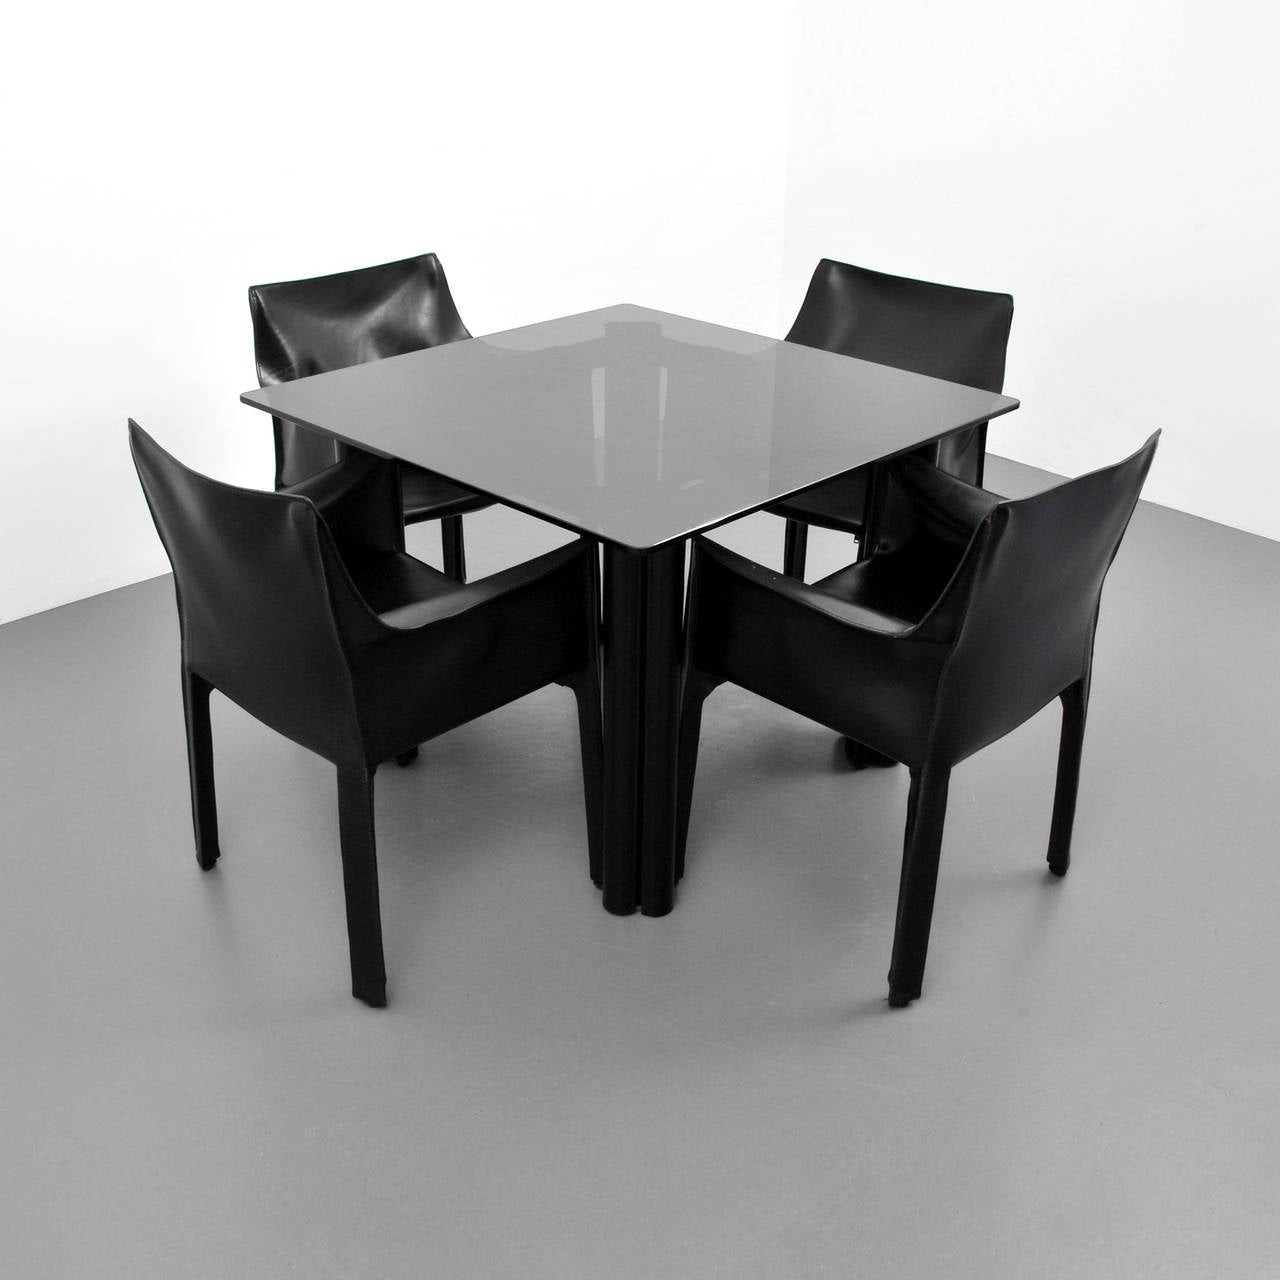 Set of four leather arm chairs by Mario Bellini. Tinted glass and leather wrapped base dining/game table by Acerbis International. Cassina label to chairs.

Dimensions: 28